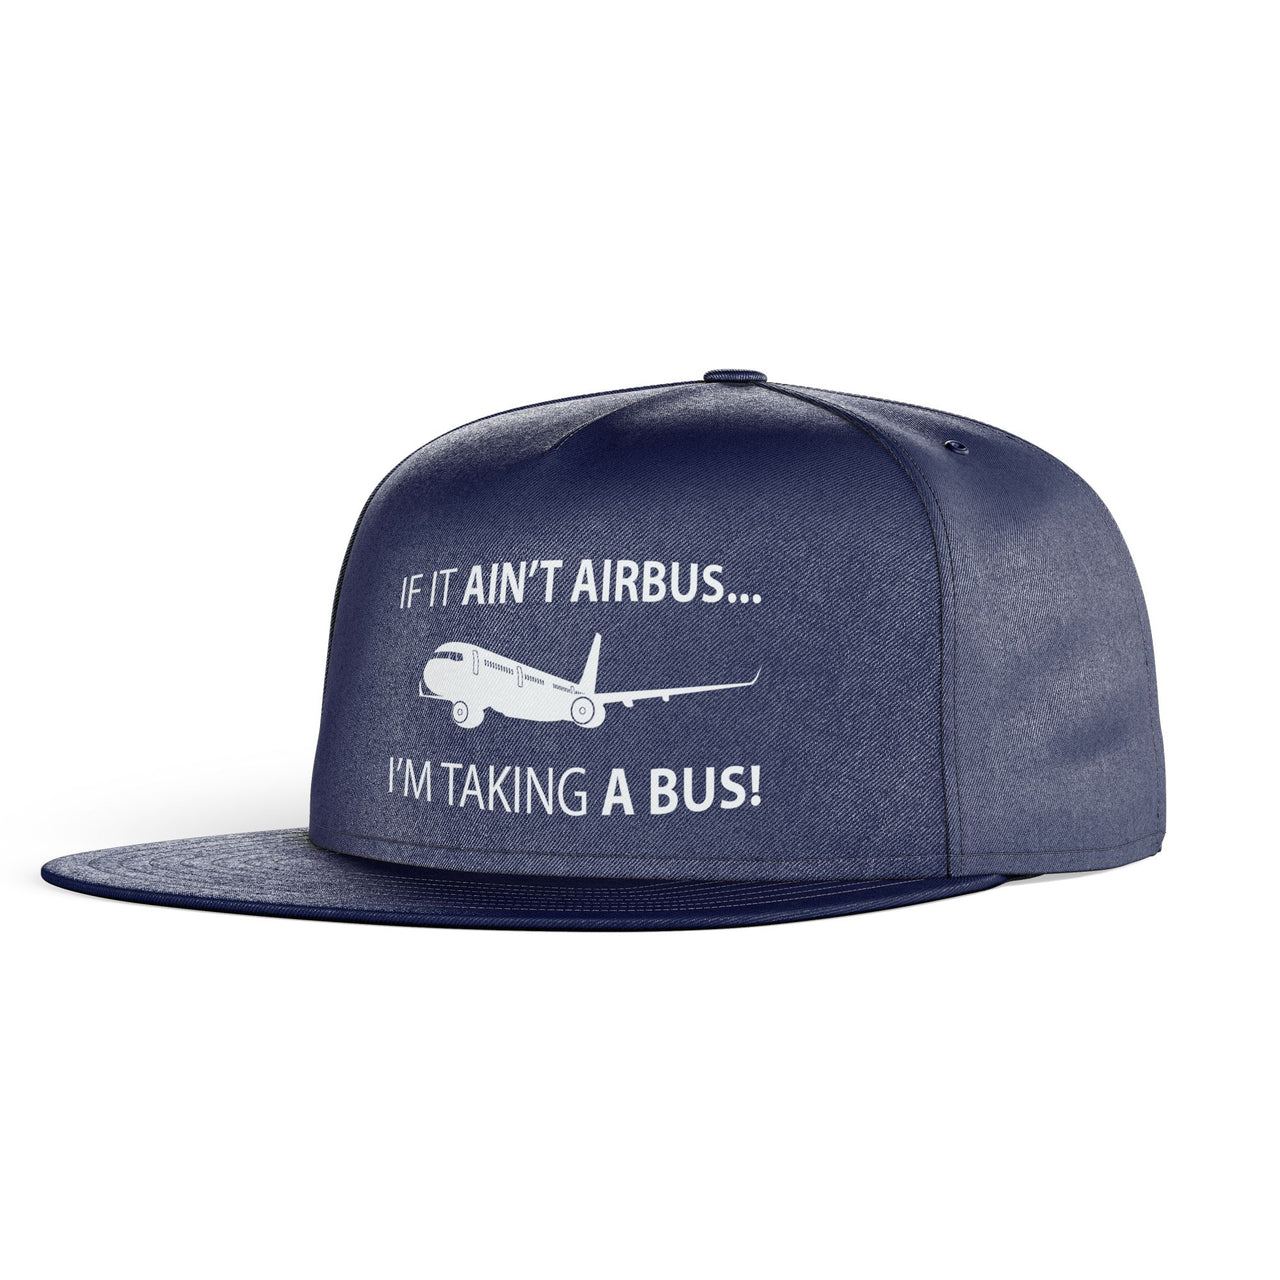 If It Ain't Airbus I'm Taking A Bus Designed Snapback Caps & Hats